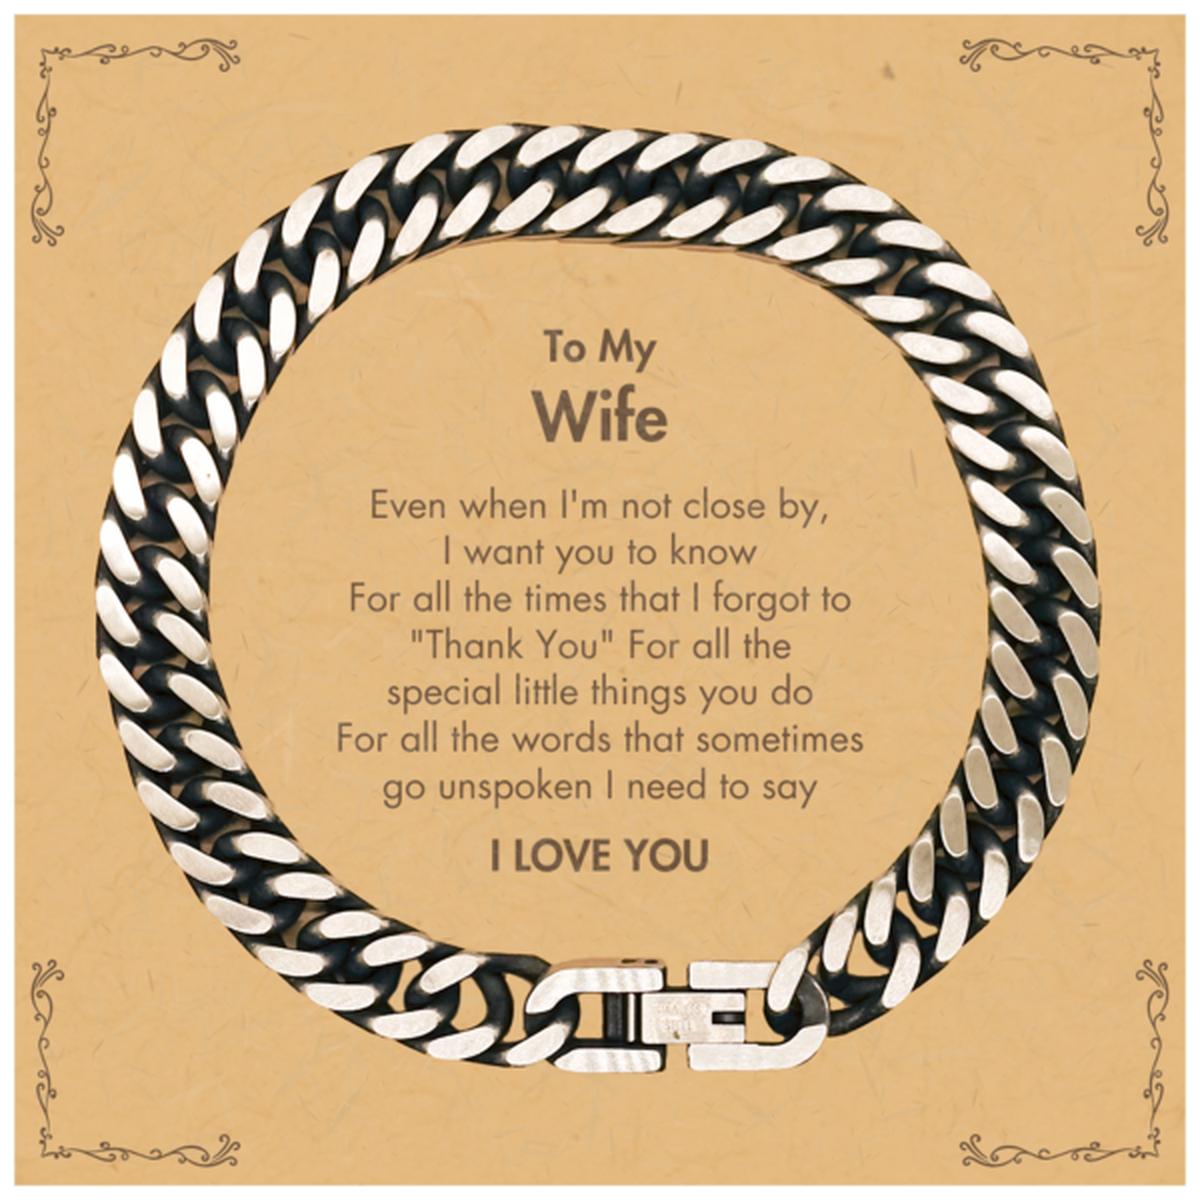 Thank You Gifts for Wife, Keepsake Cuban Link Chain Bracelet Gifts for Wife Birthday Mother's day Father's Day Wife For all the words That sometimes go unspoken I need to say I LOVE YOU